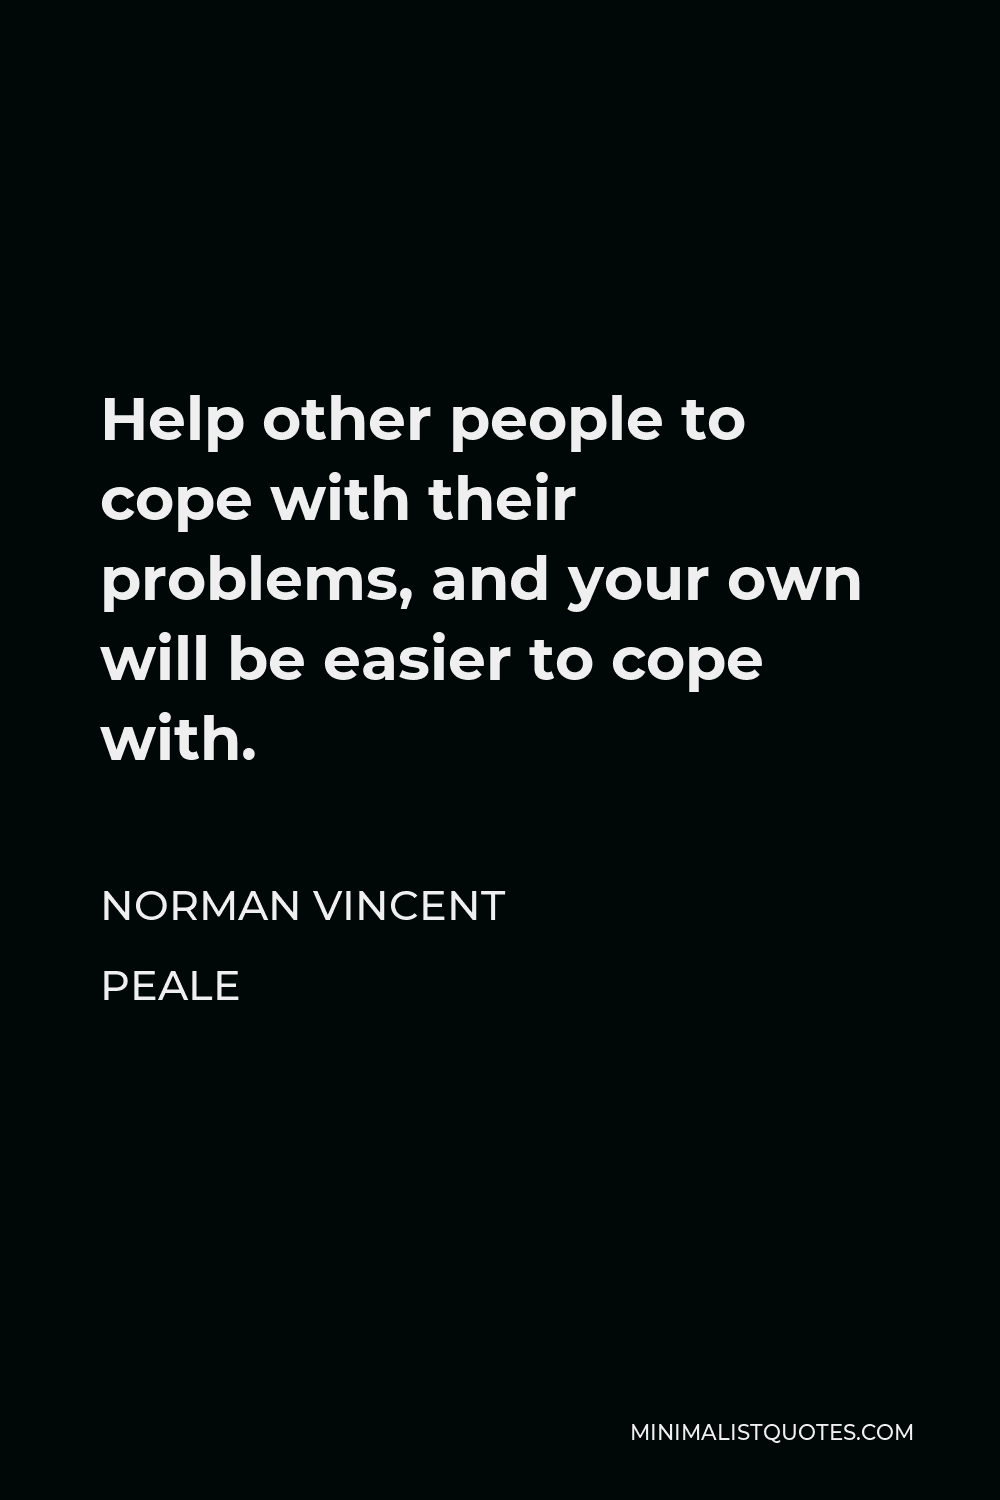 Norman Vincent Peale Quote - Help other people to cope with their problems, and your own will be easier to cope with.